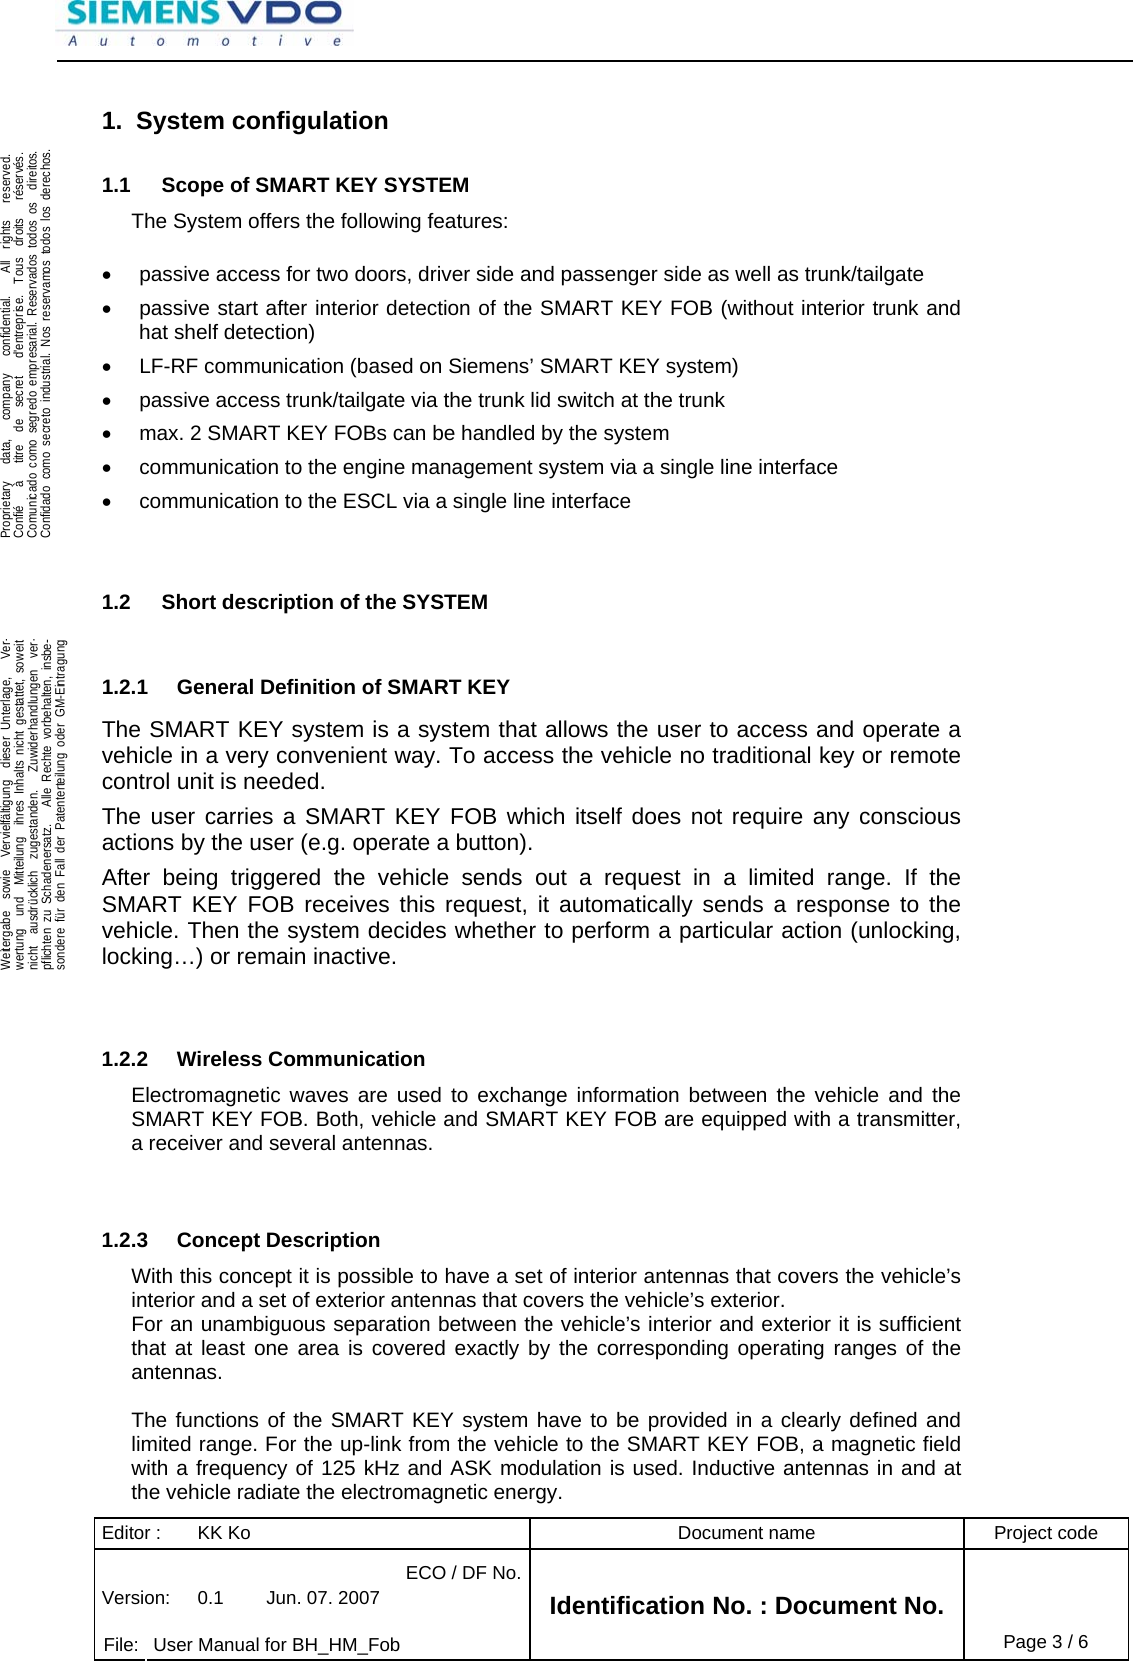 Editor :  KK Ko  Document name  Project code ECO / DF No.Version:  0.1  Jun. 07. 2007    File:  User Manual for BH_HM_Fob Identification No. : Document No. Page 3 / 6    .Proprietary   data,   company   confidential.    All  rights   reserved.Confié   à   titre  de  secret   d&apos;entreprise.  Tous  droits   réservés.Comunicado como segredo empresarial. Reservados todos os  direitos.Confidado como secreto industrial. Nos reservamos todos los derechos.  .Weitergabe  sowie  Vervielfältigung  dieser Unterlage,   Ver-wertung  und  Mitteilung  ihres Inhalts nicht gestattet, soweitnicht  ausdrücklich  zugestanden.   Zuwiderhandlungen  ver-pflichten zu Schadenersatz.   Alle Rechte vorbehalten, insbe-sondere für den Fall der Patenterteilung oder GM-Eintragung  1. System configulation 1.1  Scope of SMART KEY SYSTEM The System offers the following features:  •  passive access for two doors, driver side and passenger side as well as trunk/tailgate •  passive start after interior detection of the SMART KEY FOB (without interior trunk and hat shelf detection) •  LF-RF communication (based on Siemens’ SMART KEY system) •  passive access trunk/tailgate via the trunk lid switch at the trunk •  max. 2 SMART KEY FOBs can be handled by the system •  communication to the engine management system via a single line interface •  communication to the ESCL via a single line interface   1.2  Short description of the SYSTEM  1.2.1  General Definition of SMART KEY The SMART KEY system is a system that allows the user to access and operate a vehicle in a very convenient way. To access the vehicle no traditional key or remote control unit is needed.  The user carries a SMART KEY FOB which itself does not require any conscious actions by the user (e.g. operate a button).  After being triggered the vehicle sends out a request in a limited range. If the SMART KEY FOB receives this request, it automatically sends a response to the vehicle. Then the system decides whether to perform a particular action (unlocking, locking…) or remain inactive.   1.2.2 Wireless Communication Electromagnetic waves are used to exchange information between the vehicle and the SMART KEY FOB. Both, vehicle and SMART KEY FOB are equipped with a transmitter, a receiver and several antennas.    1.2.3 Concept Description With this concept it is possible to have a set of interior antennas that covers the vehicle’s interior and a set of exterior antennas that covers the vehicle’s exterior. For an unambiguous separation between the vehicle’s interior and exterior it is sufficient that at least one area is covered exactly by the corresponding operating ranges of the antennas.  The functions of the SMART KEY system have to be provided in a clearly defined and limited range. For the up-link from the vehicle to the SMART KEY FOB, a magnetic field with a frequency of 125 kHz and ASK modulation is used. Inductive antennas in and at the vehicle radiate the electromagnetic energy. 